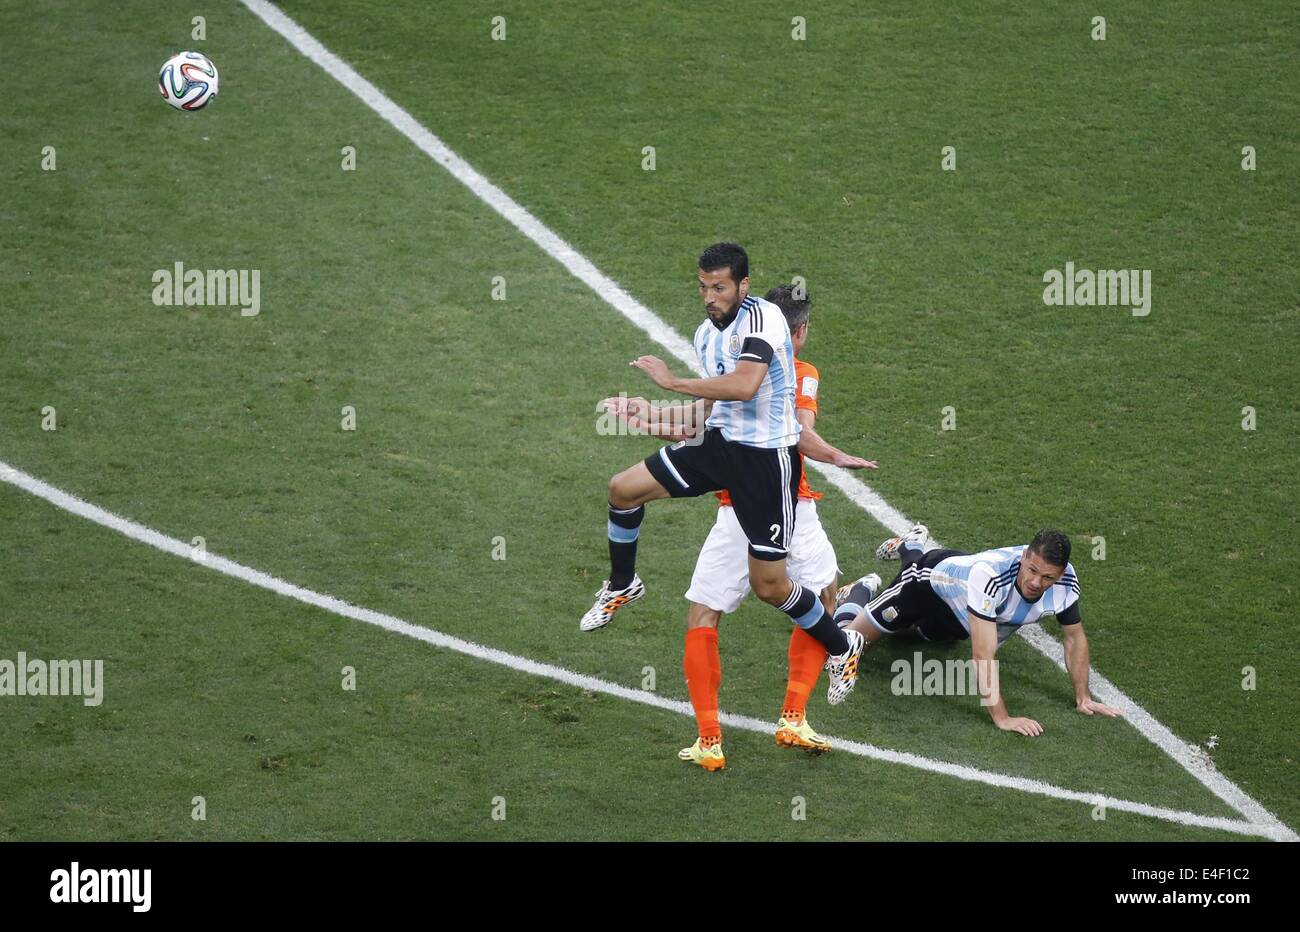 Sao Paulo, Brazil. 9th July, 2014. Argentina's Ezequiel Garay (L) jumps for a header during a semifinal match between Netherlands and Argentina of 2014 FIFA World Cup at the Arena de Sao Paulo Stadium in Sao Paulo, Brazil, on July 9, 2014. Credit:  Liao Yujie/Xinhua/Alamy Live News Stock Photo